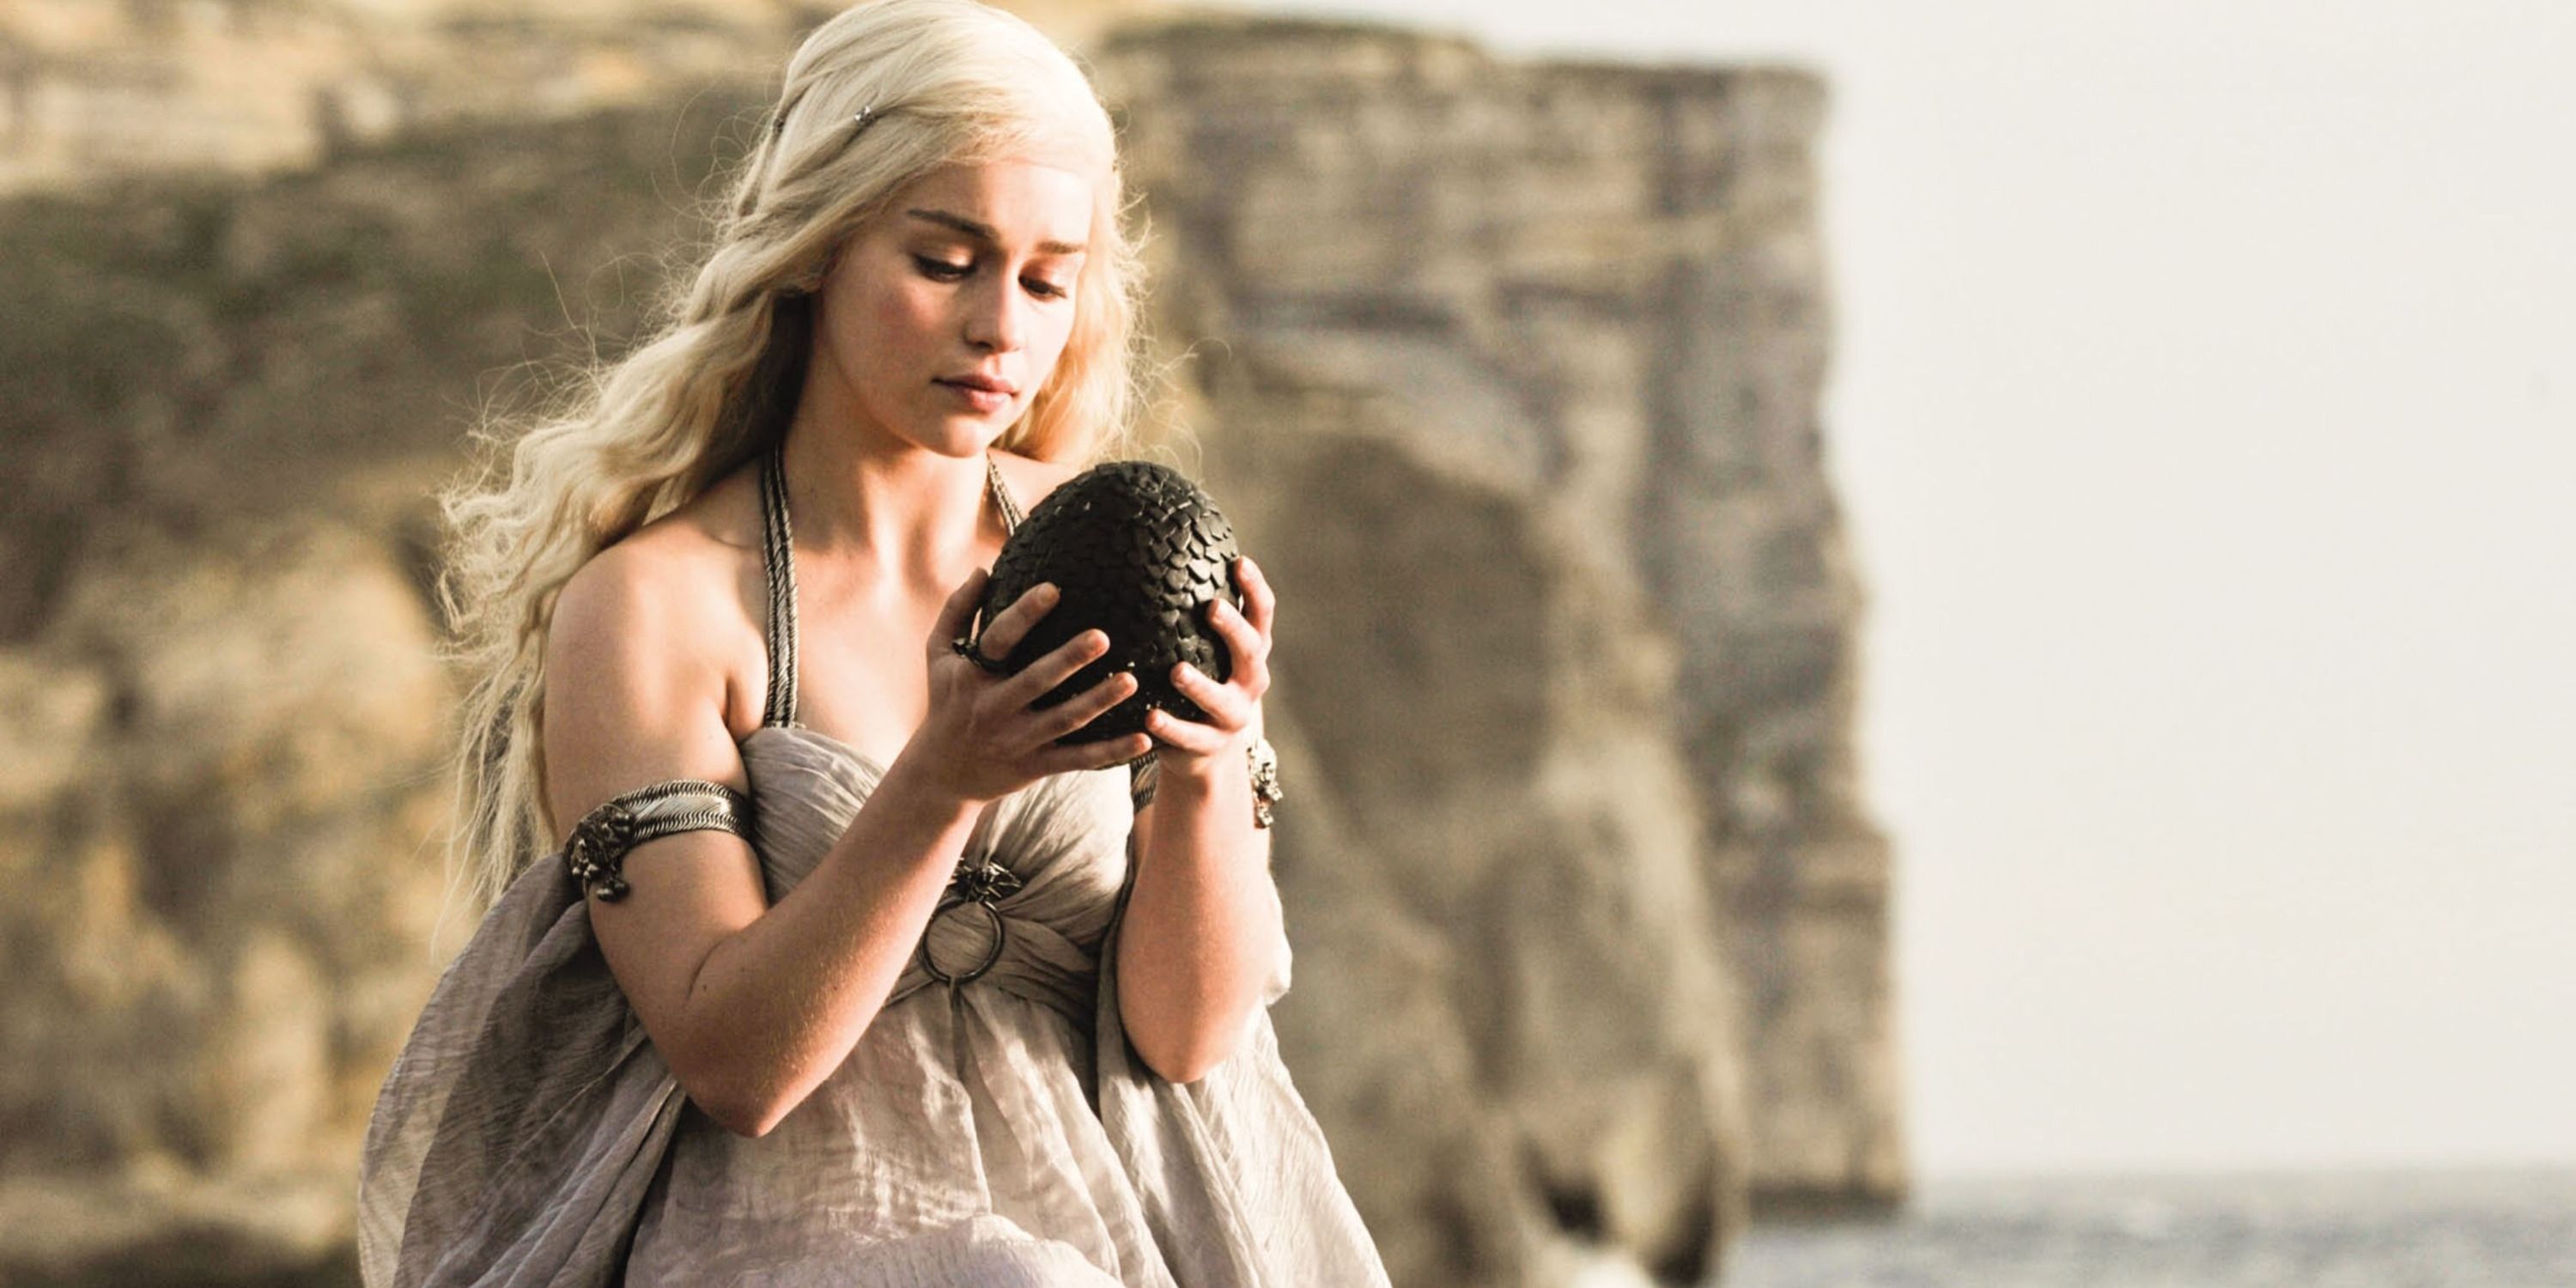 Game of Thrones 10 Unanswered Questions We Still Have About The Dragons